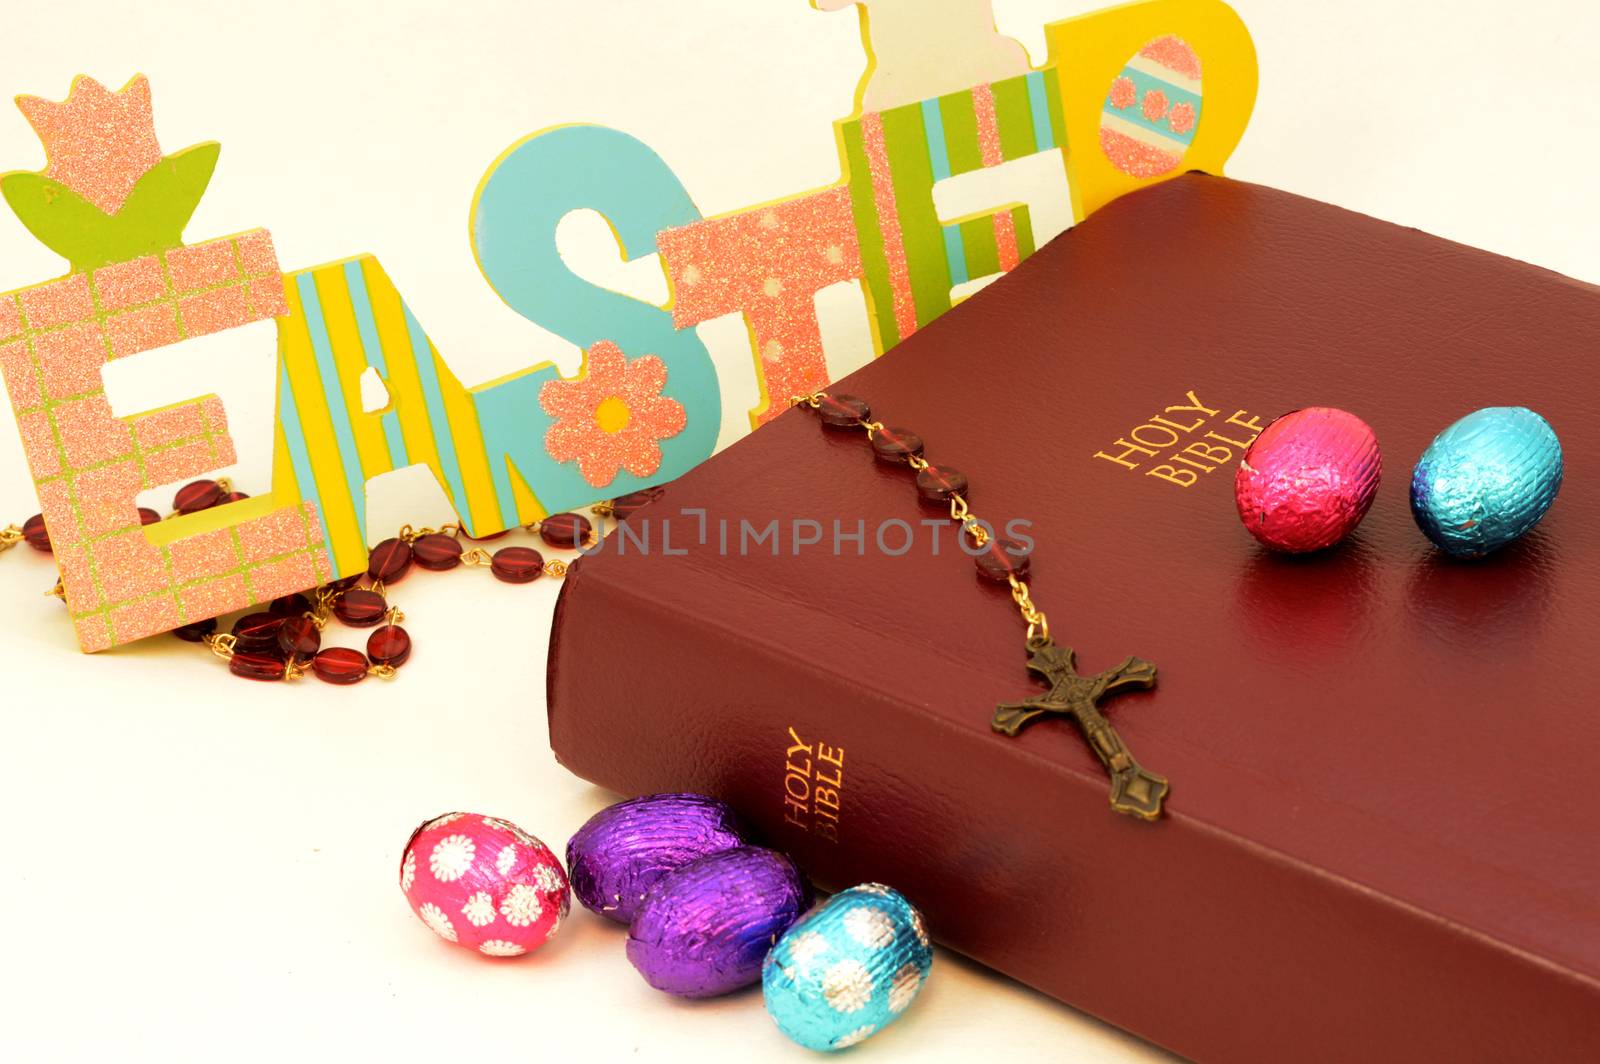 A holy bible and Easter theme to honor the seasons holiday.